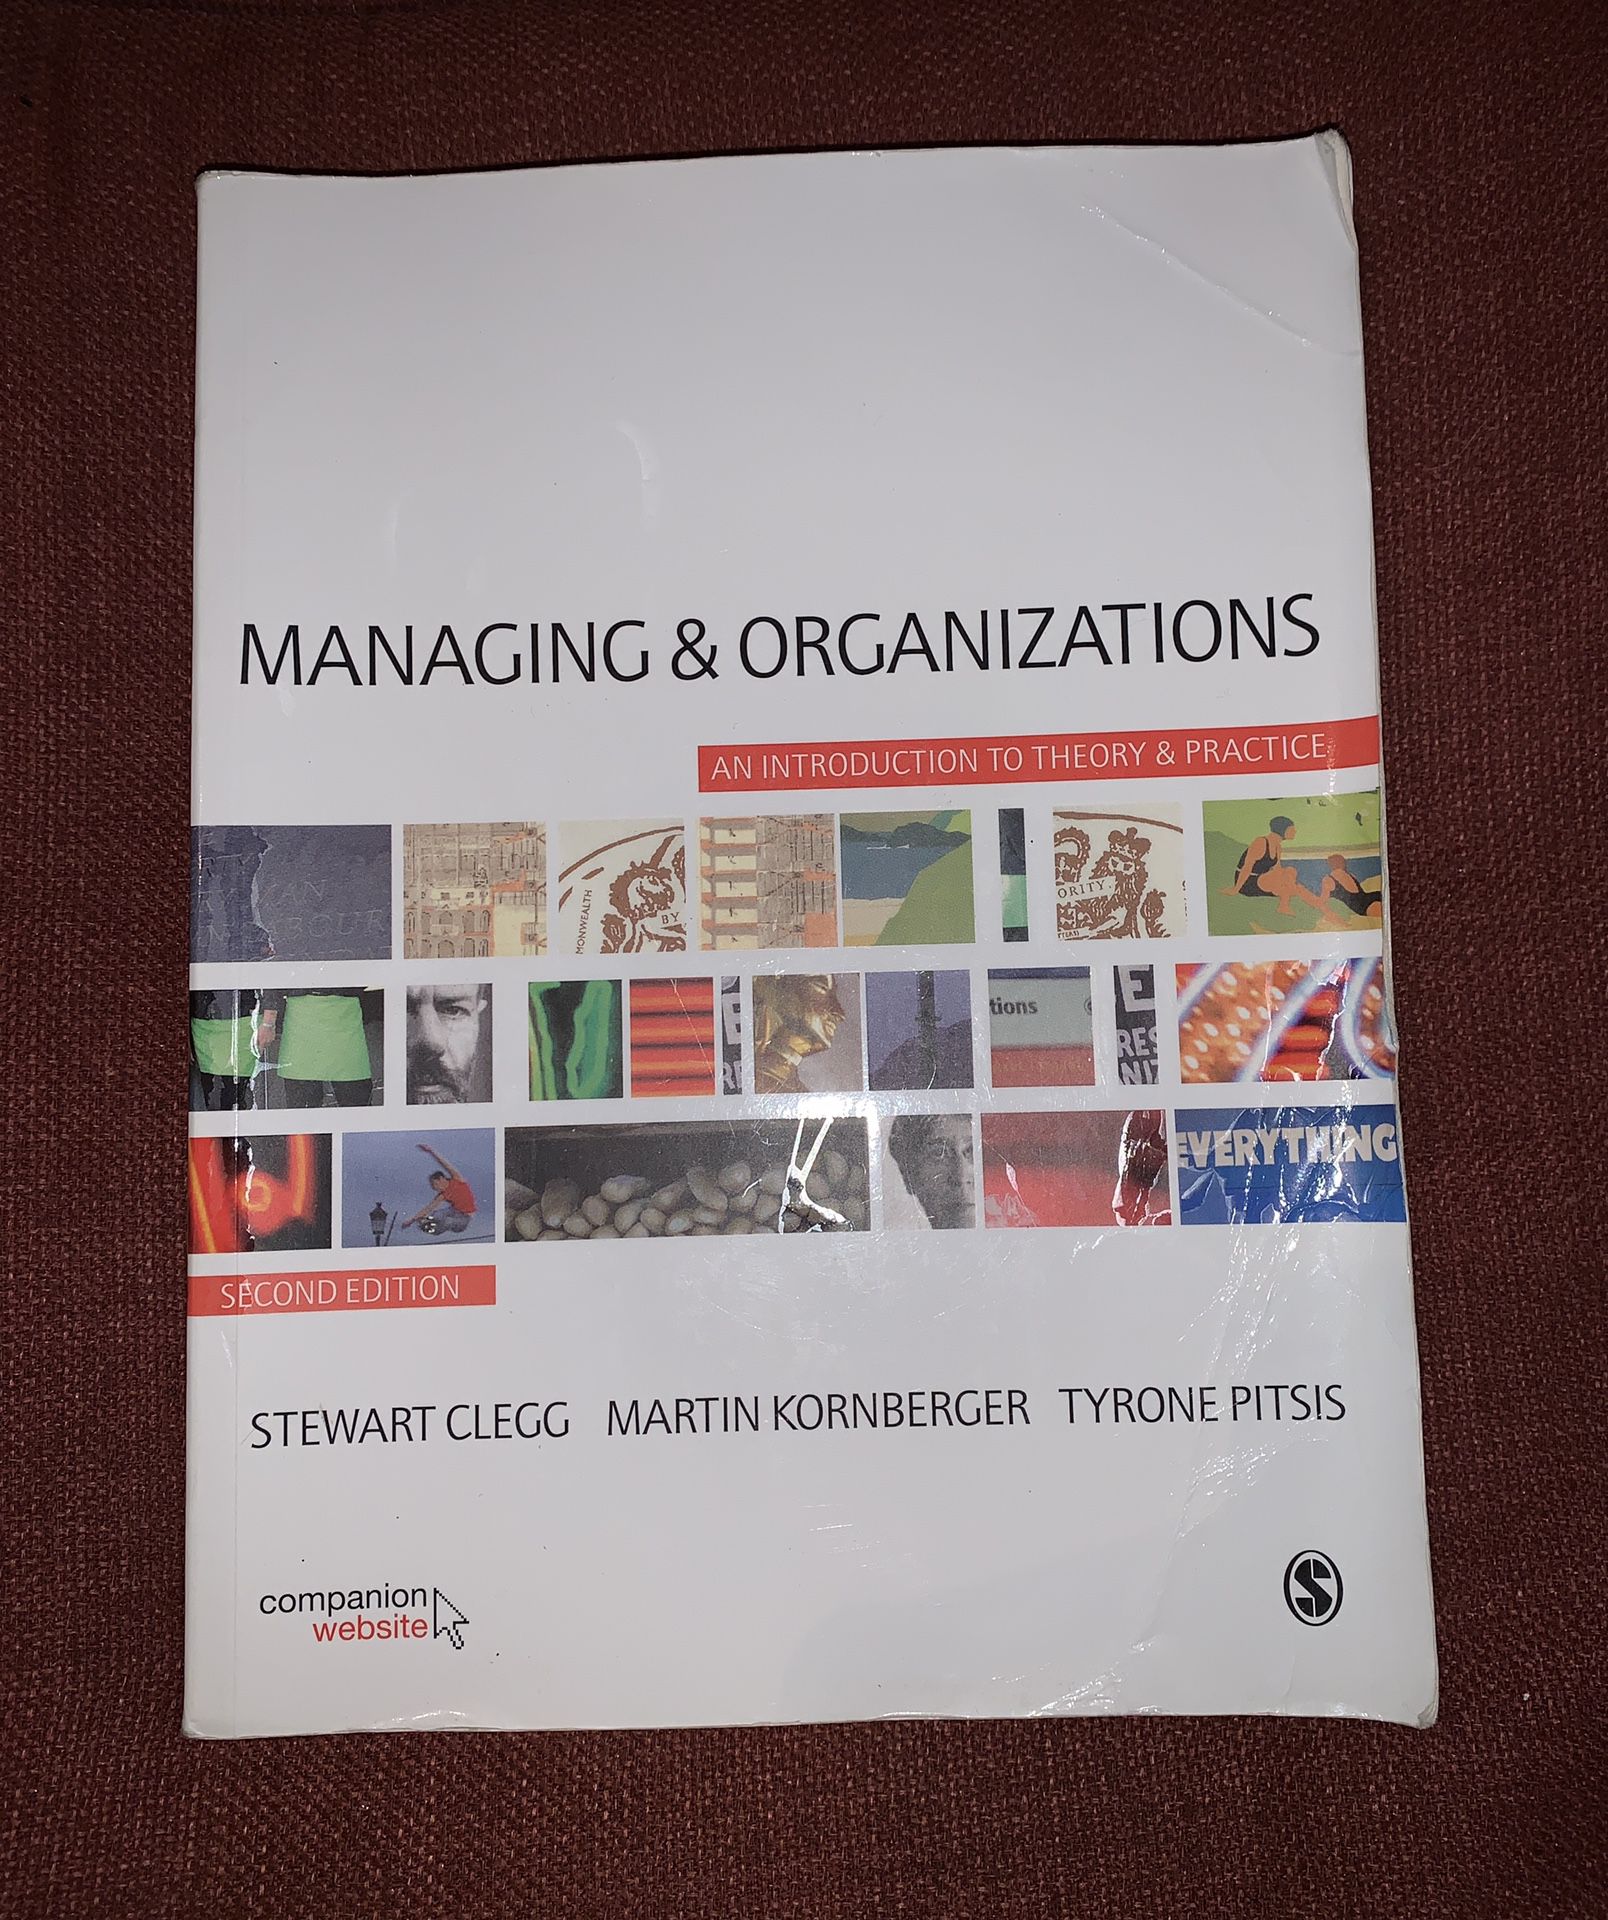 EUC “Managing & Organizations: An Introduction to Theory & Practice” (2nd Edition) textbook